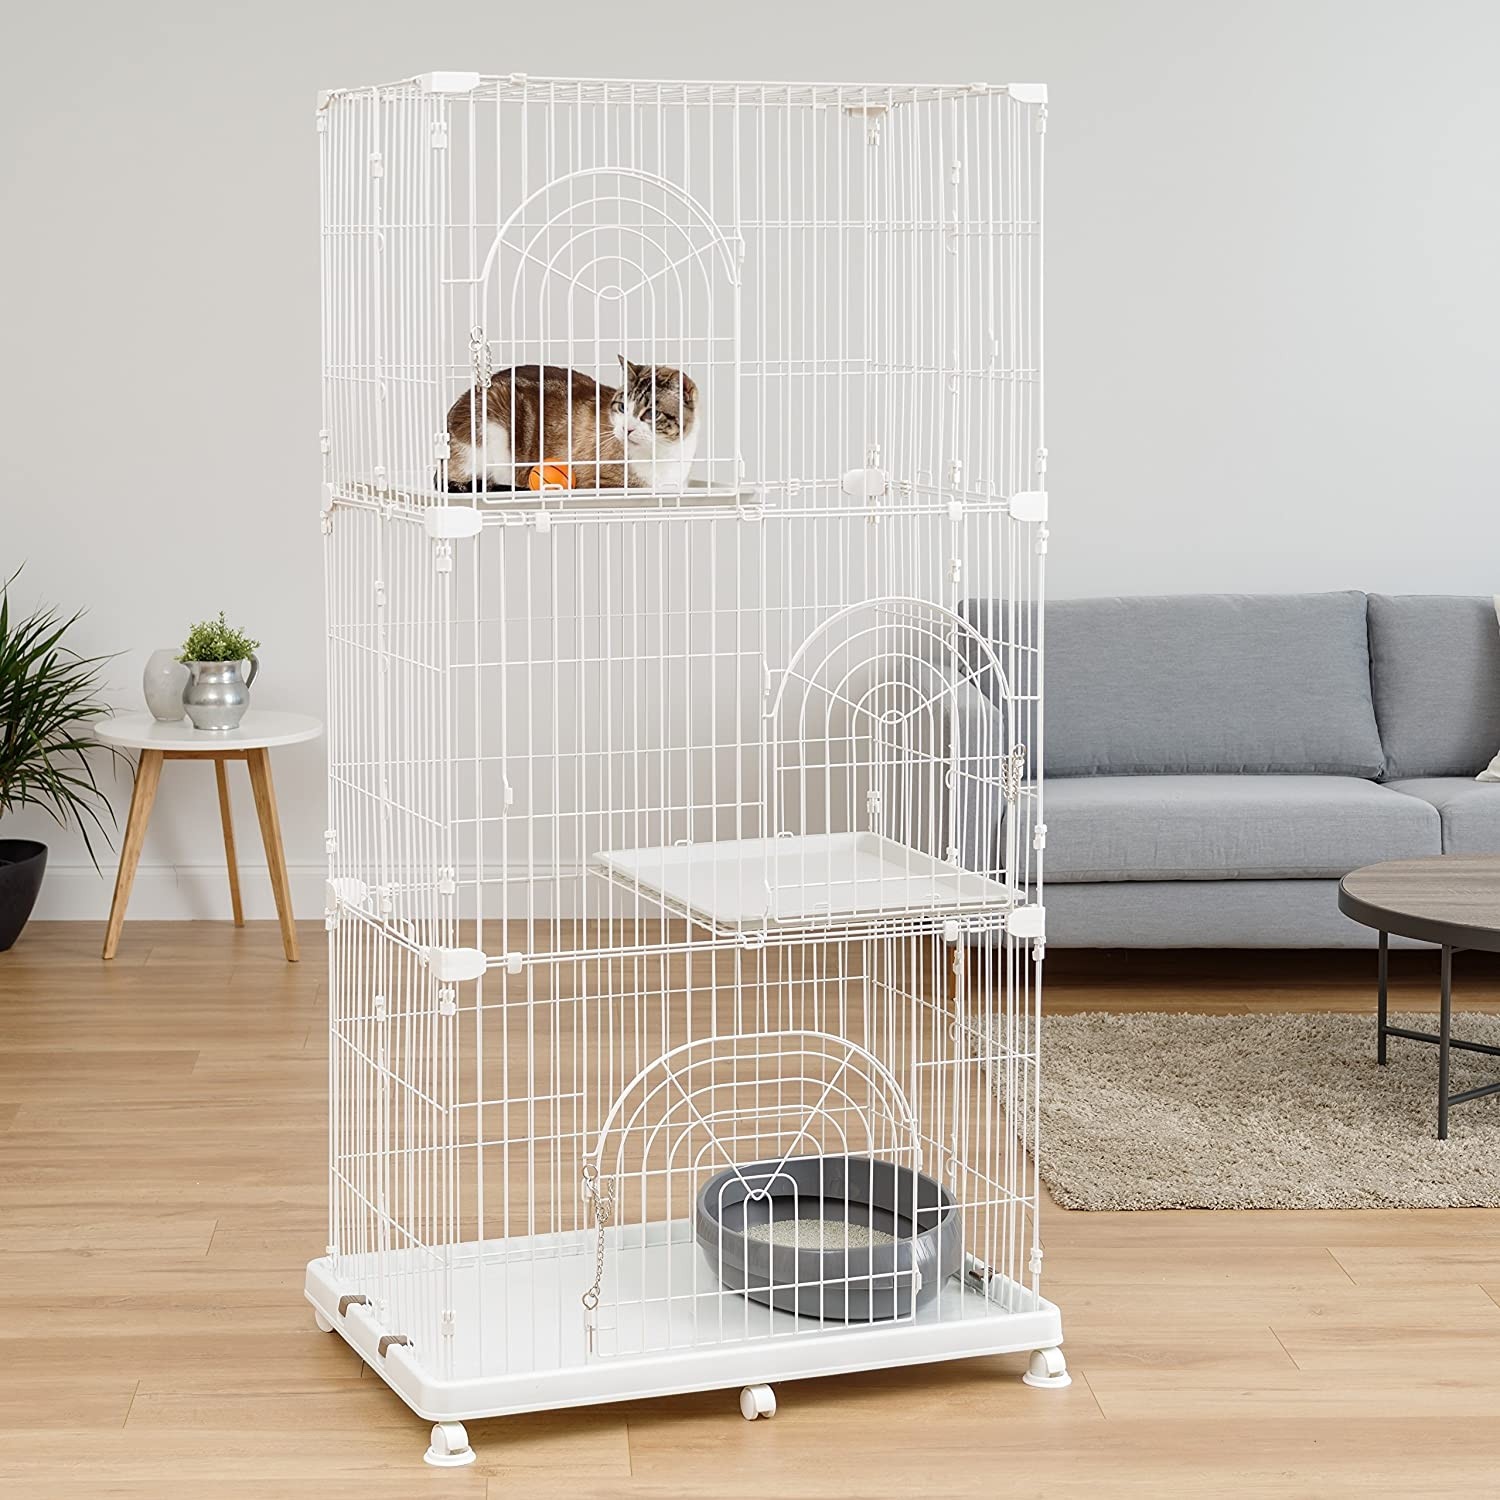 The 4 best cat cages for indoors crates playpens 1